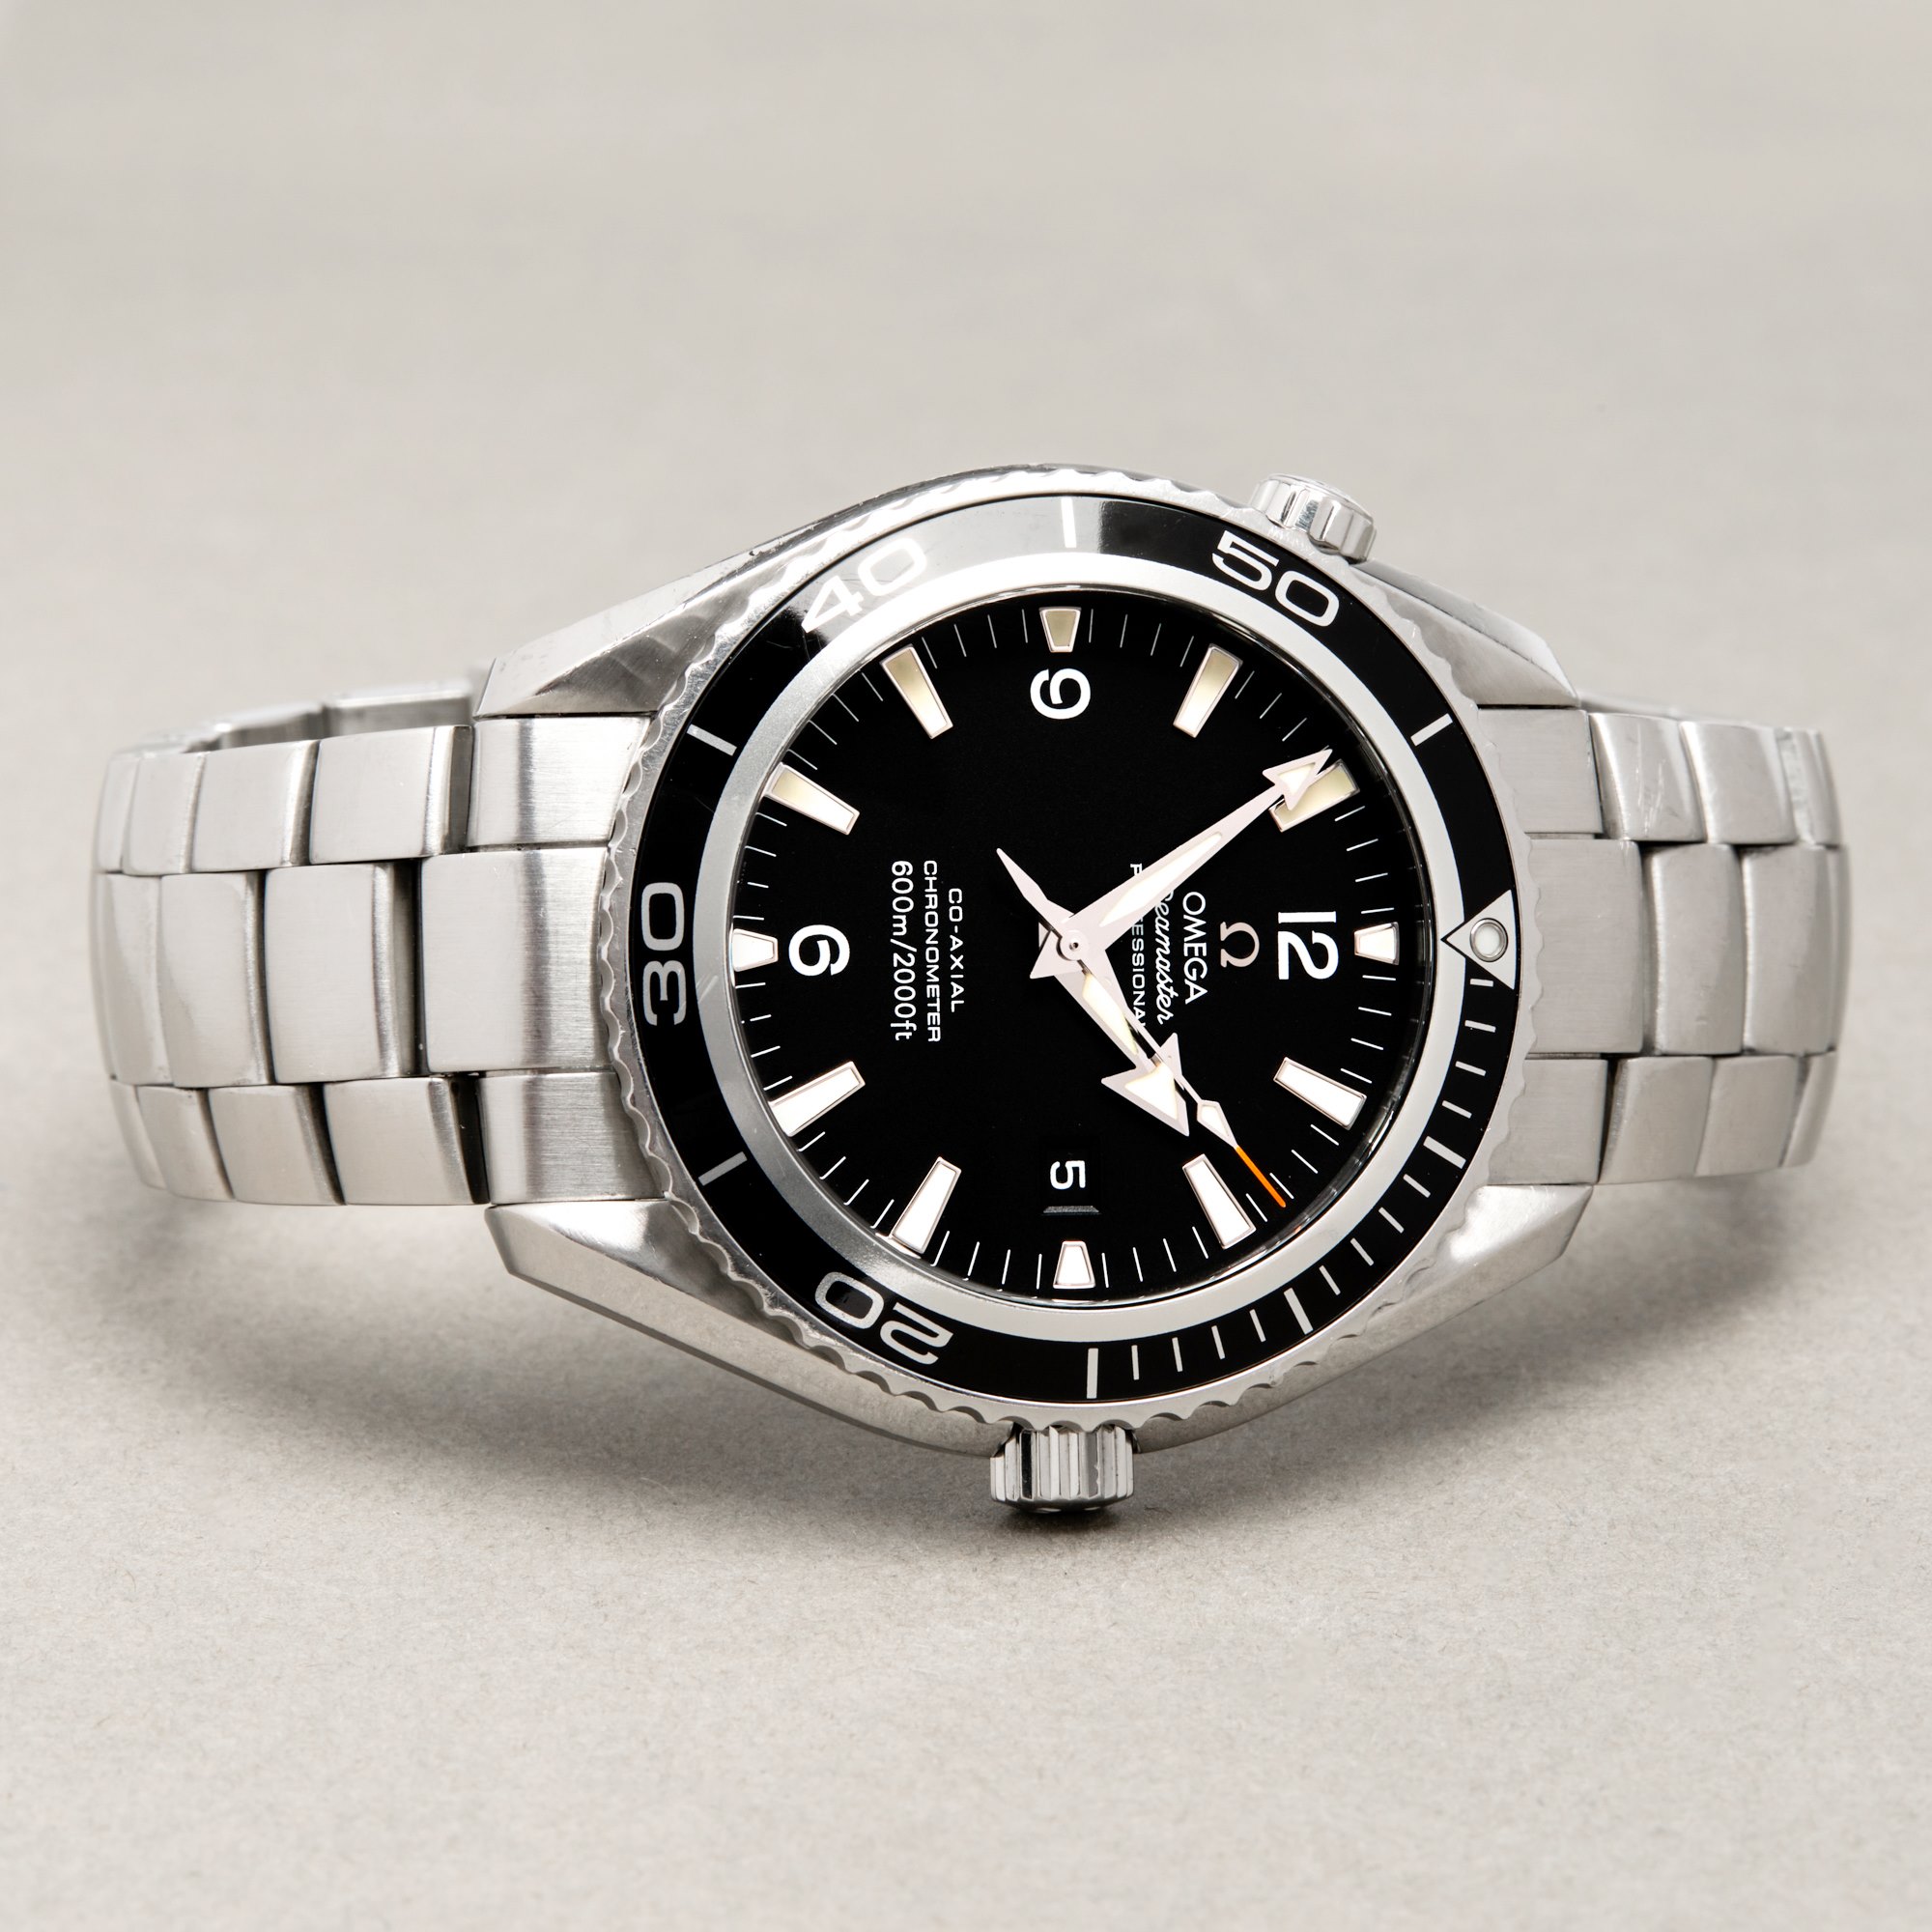 Omega Seamaster Planet Ocean SAS Special Edition Stainless Steel - 22005200 Stainless Steel 22005200